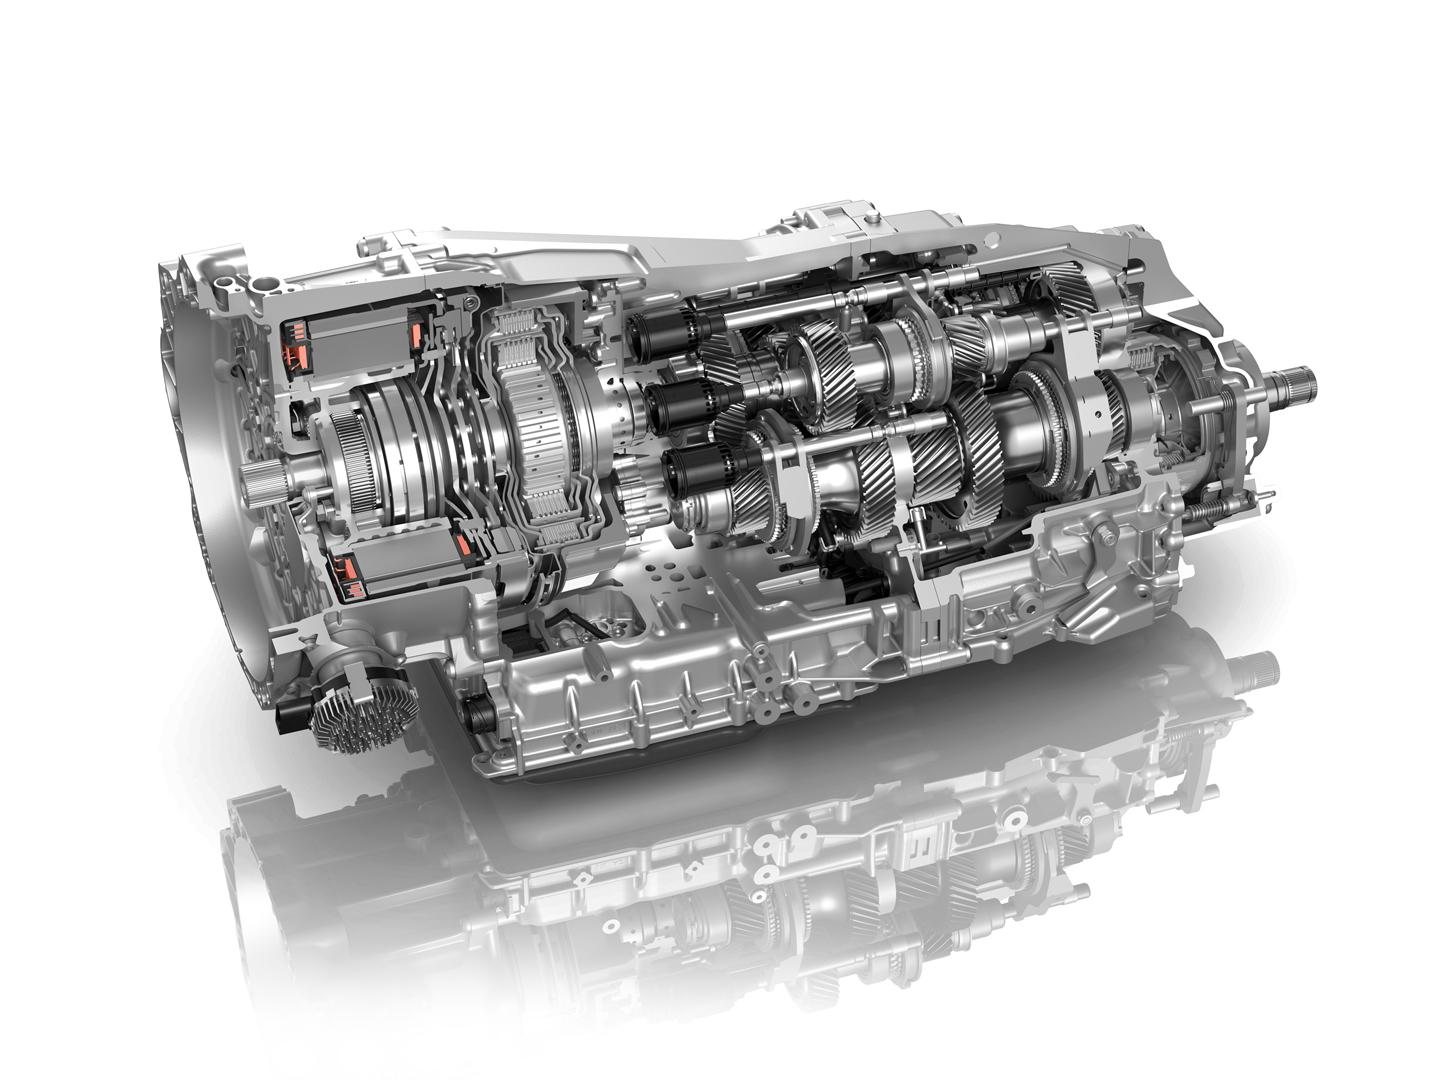 Гибрид мануал. ZF 8hp65. АКПП ZF 8hp. ZF 8 Speed transmission КАМАЗ. ZF 9s1310.